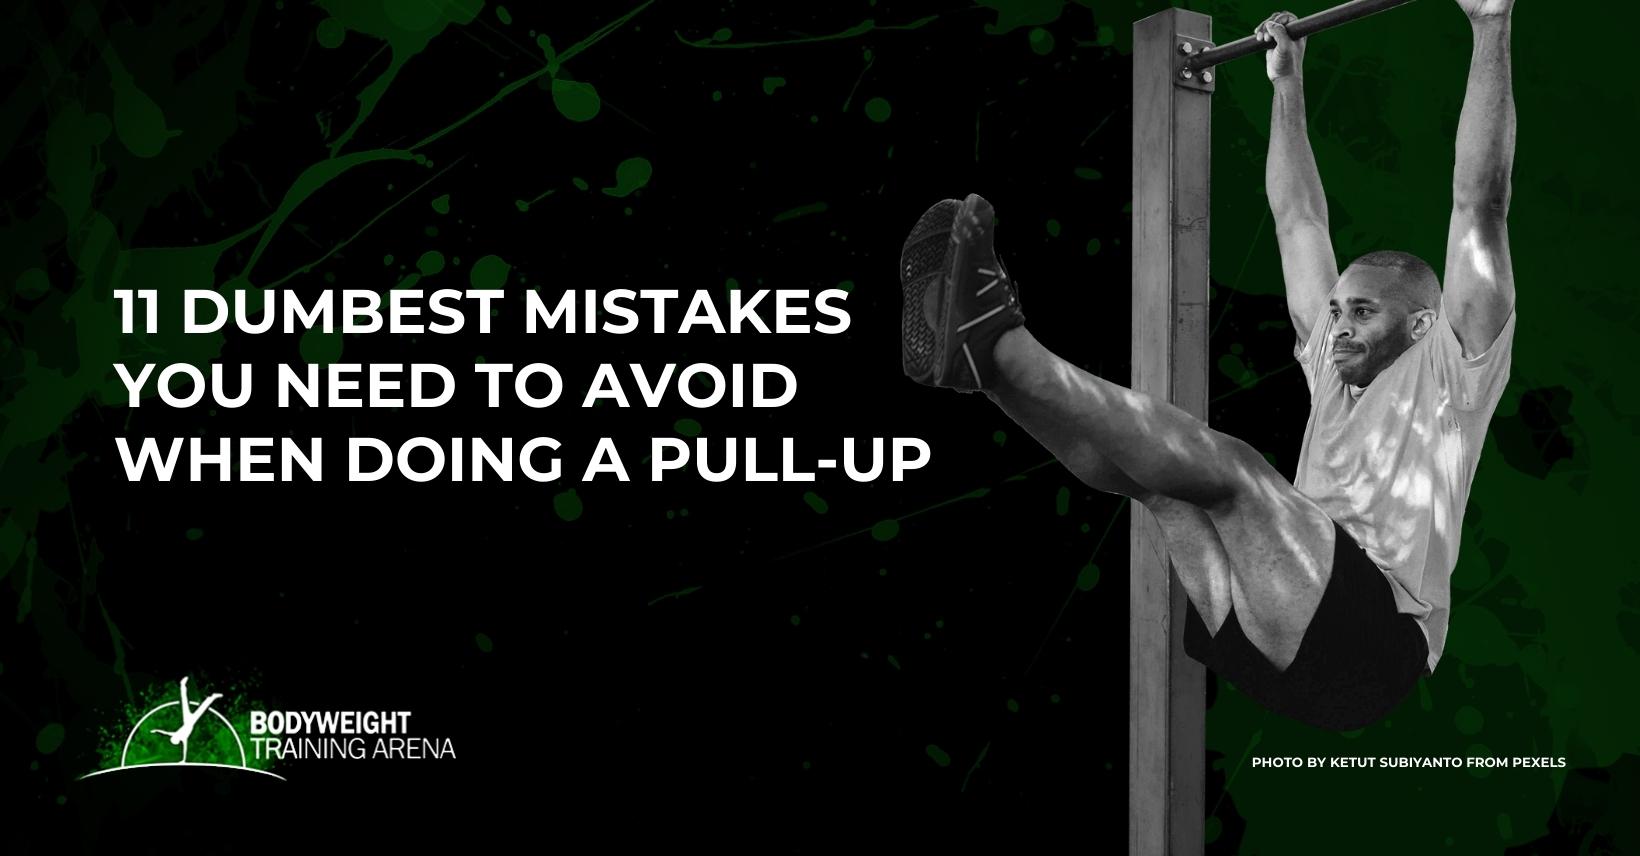 BWTA 11_Dumbest_Mistakes_You_Need_to_Avoid_When_Doing_Pull-up